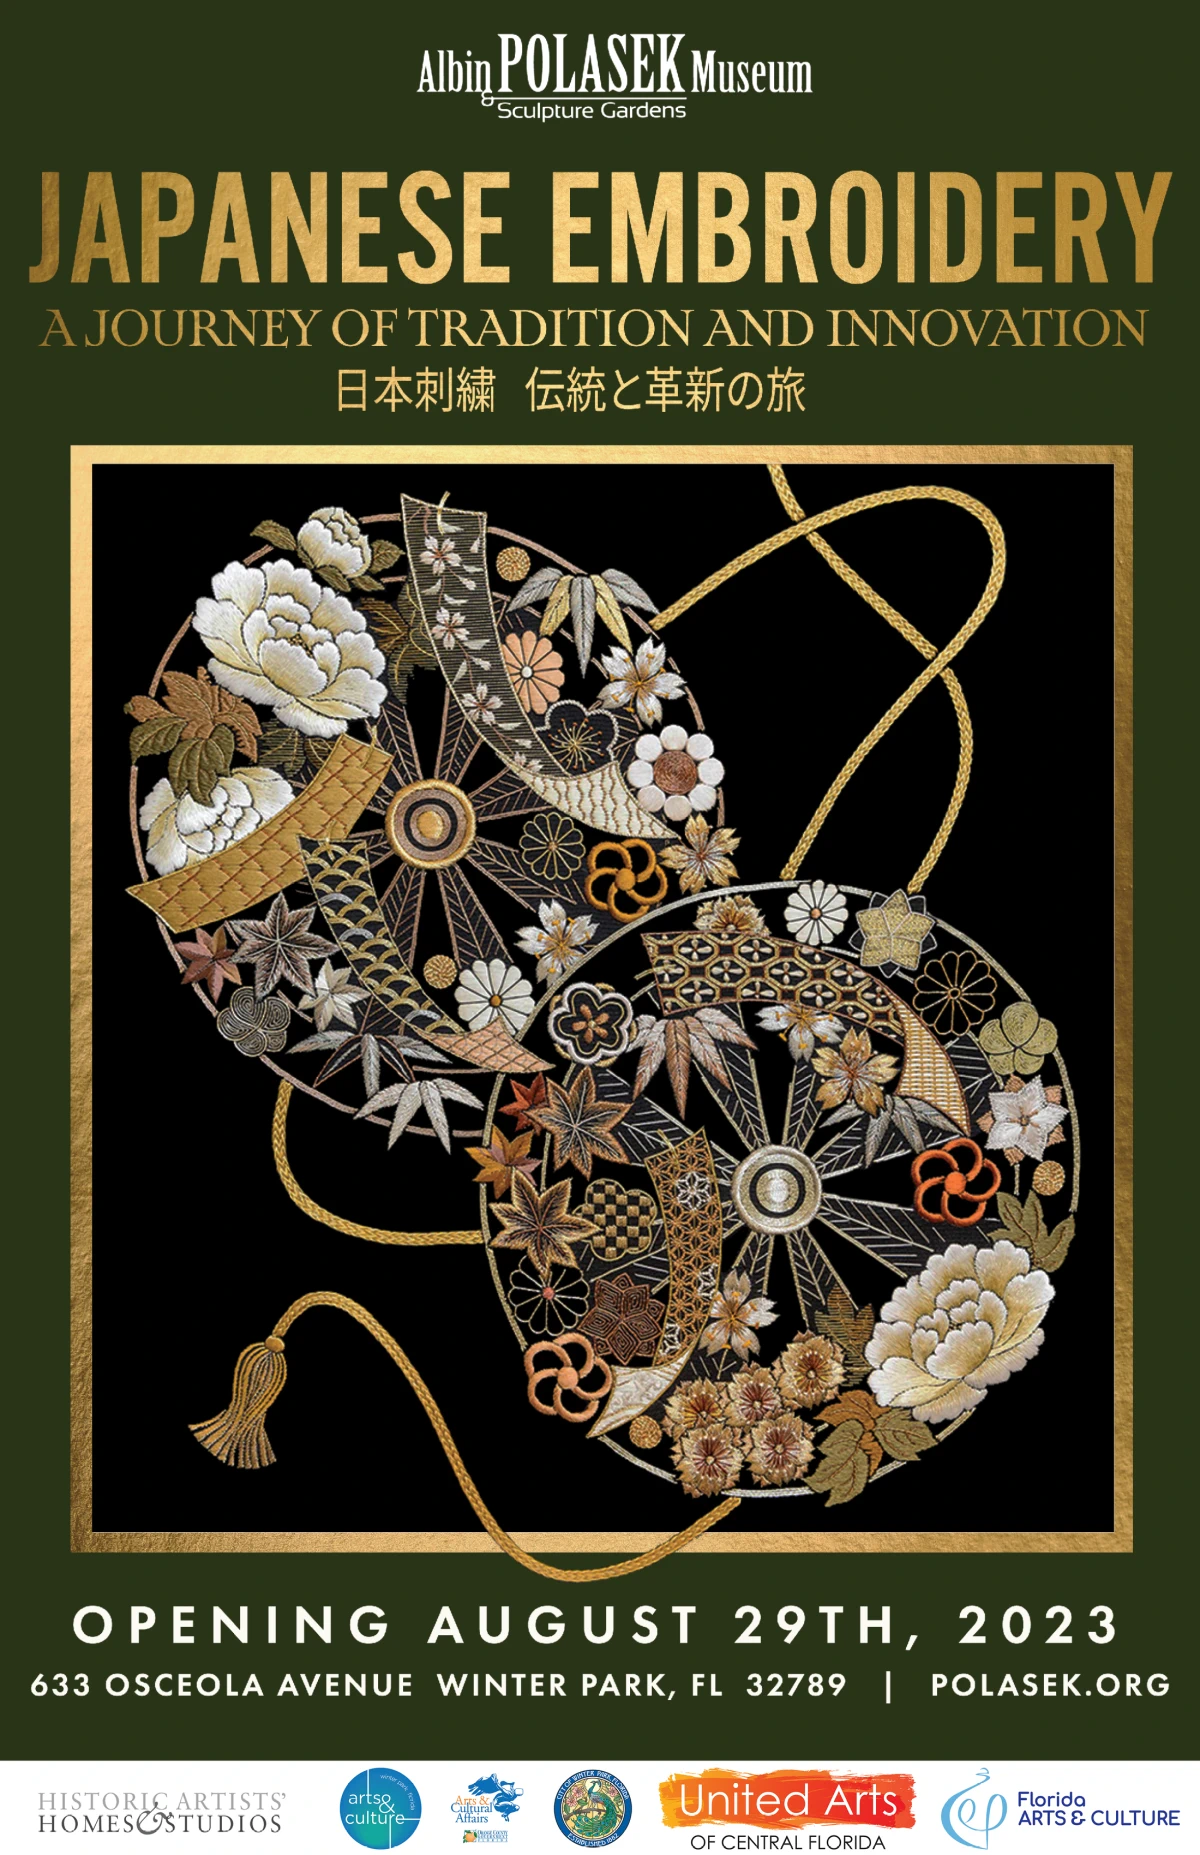 2023: Japanese Embroidery: A Journey of Tradition and Innovation (Thousand-Year-Old Technique of Traditional Japanese Embroidery, Nihon Shishu)